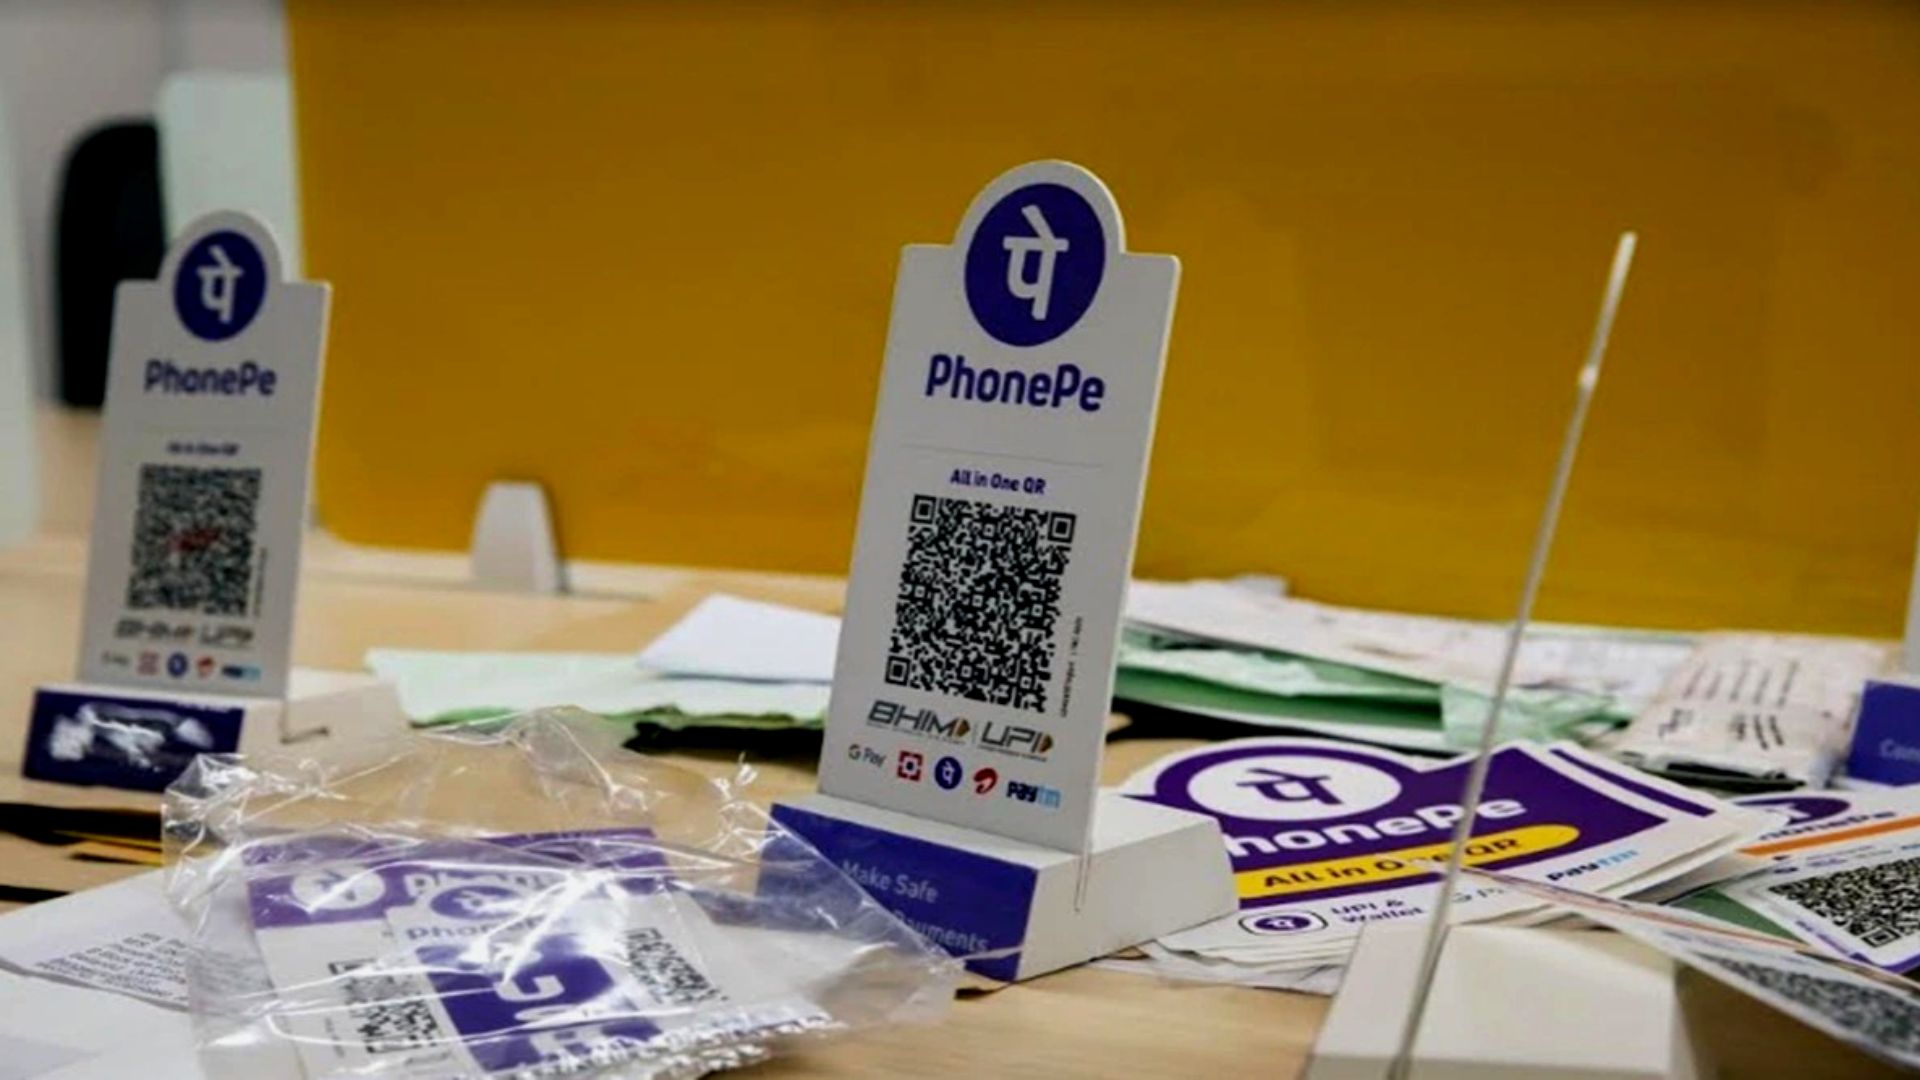 How To Get Phonepe QR Code Sticker For Shop In 6 Easy Steps?